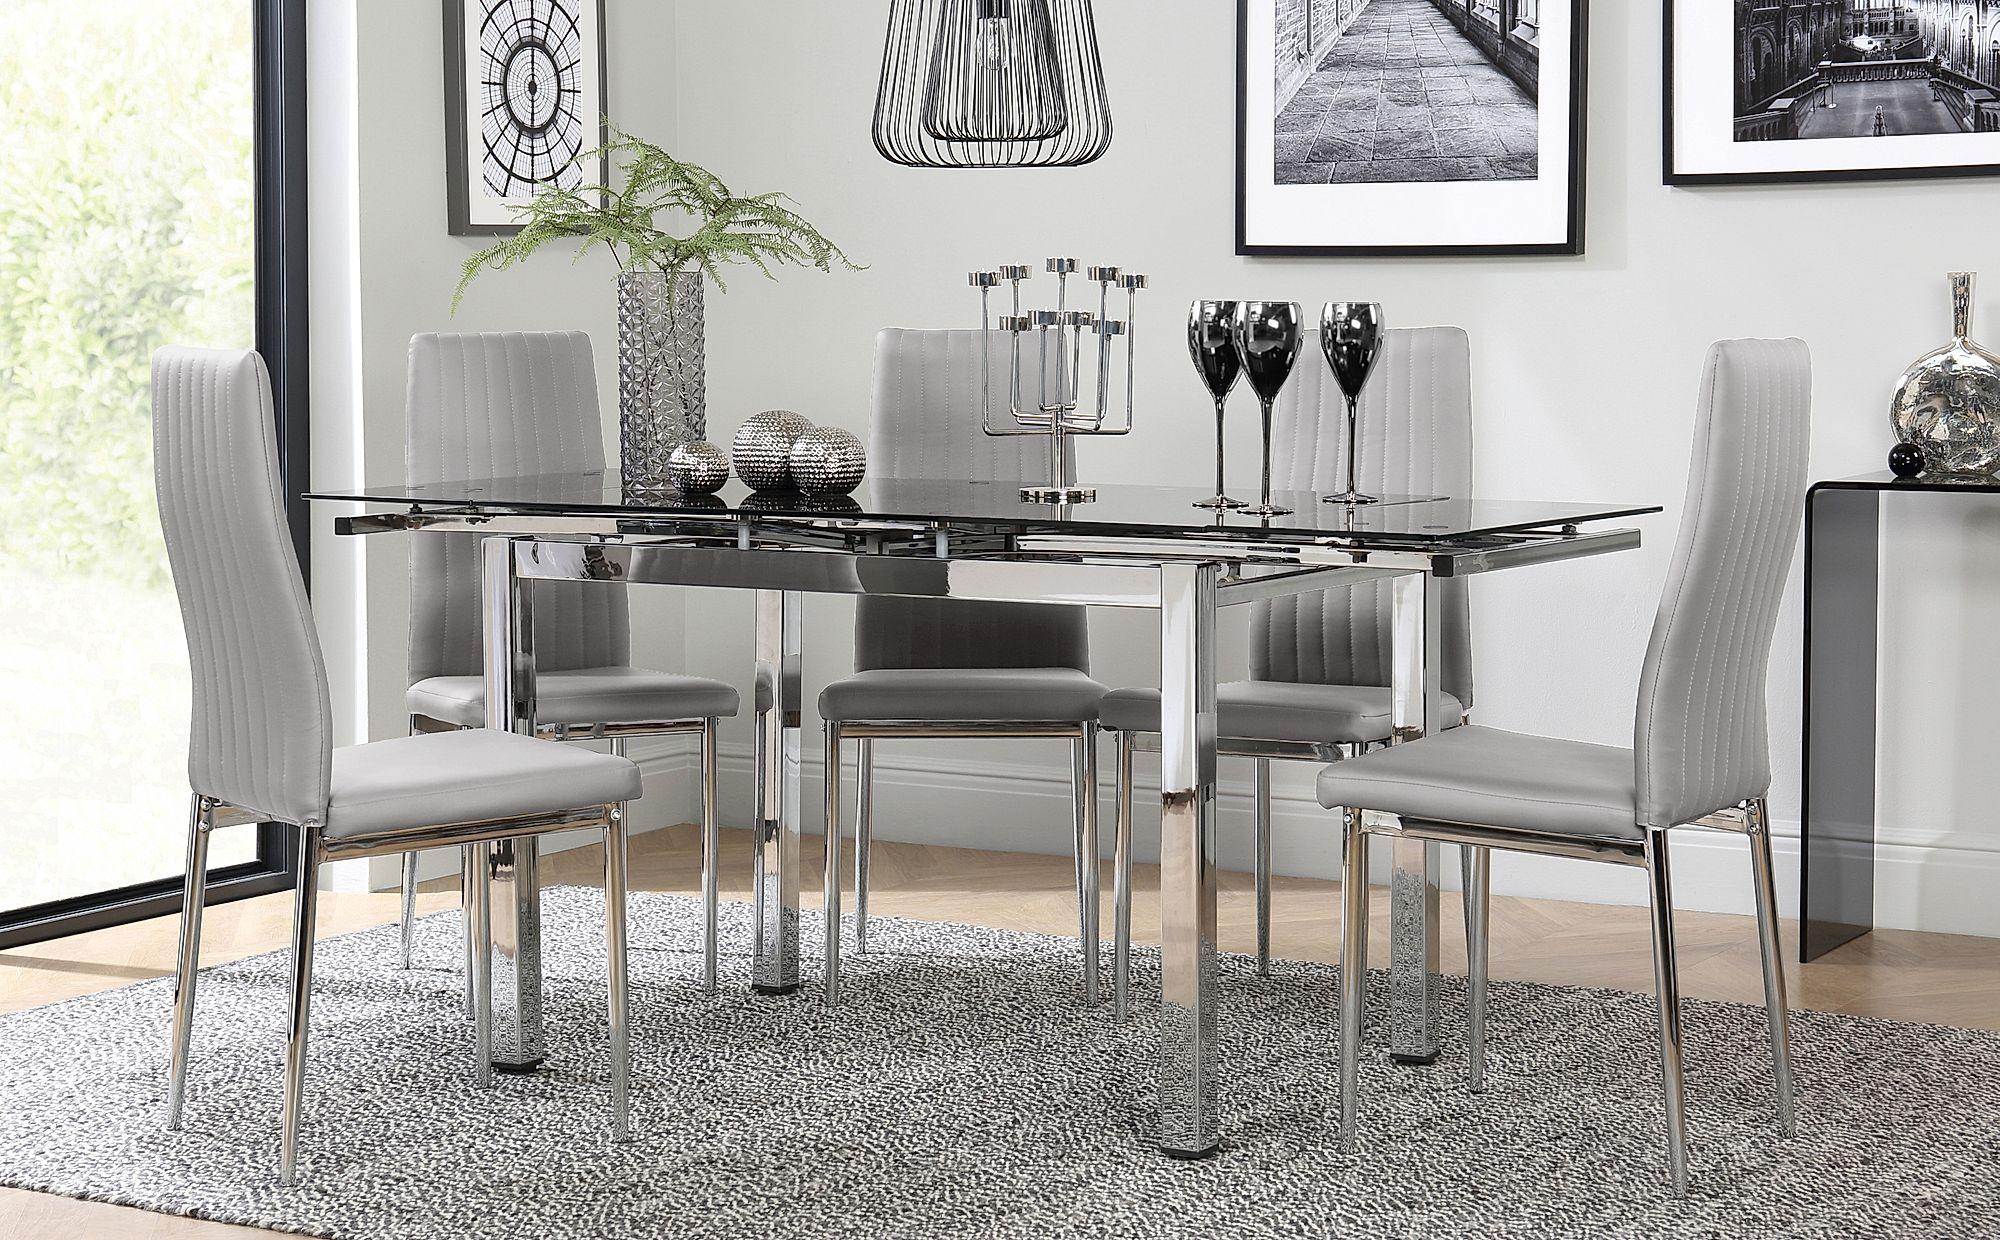 Space Chrome Black Glass Extending Dining Table With 4 Leon Light Grey Chairs regarding dimensions 2000 X 1240